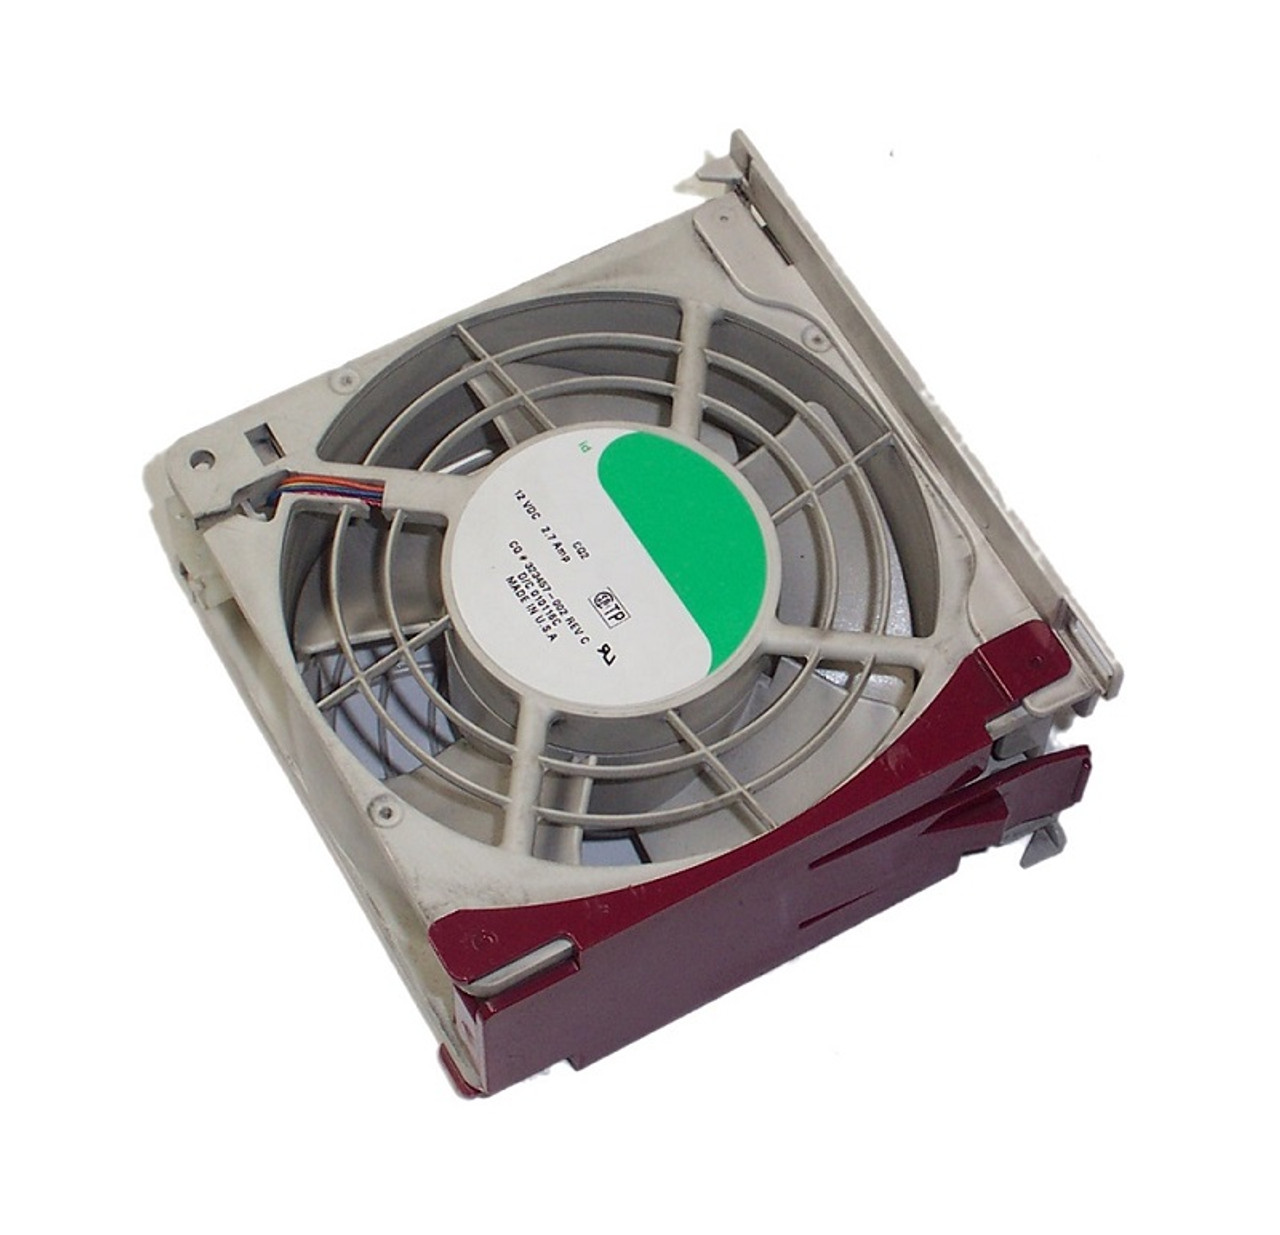 02X0NG - Dell Fan for PowerEdge R620